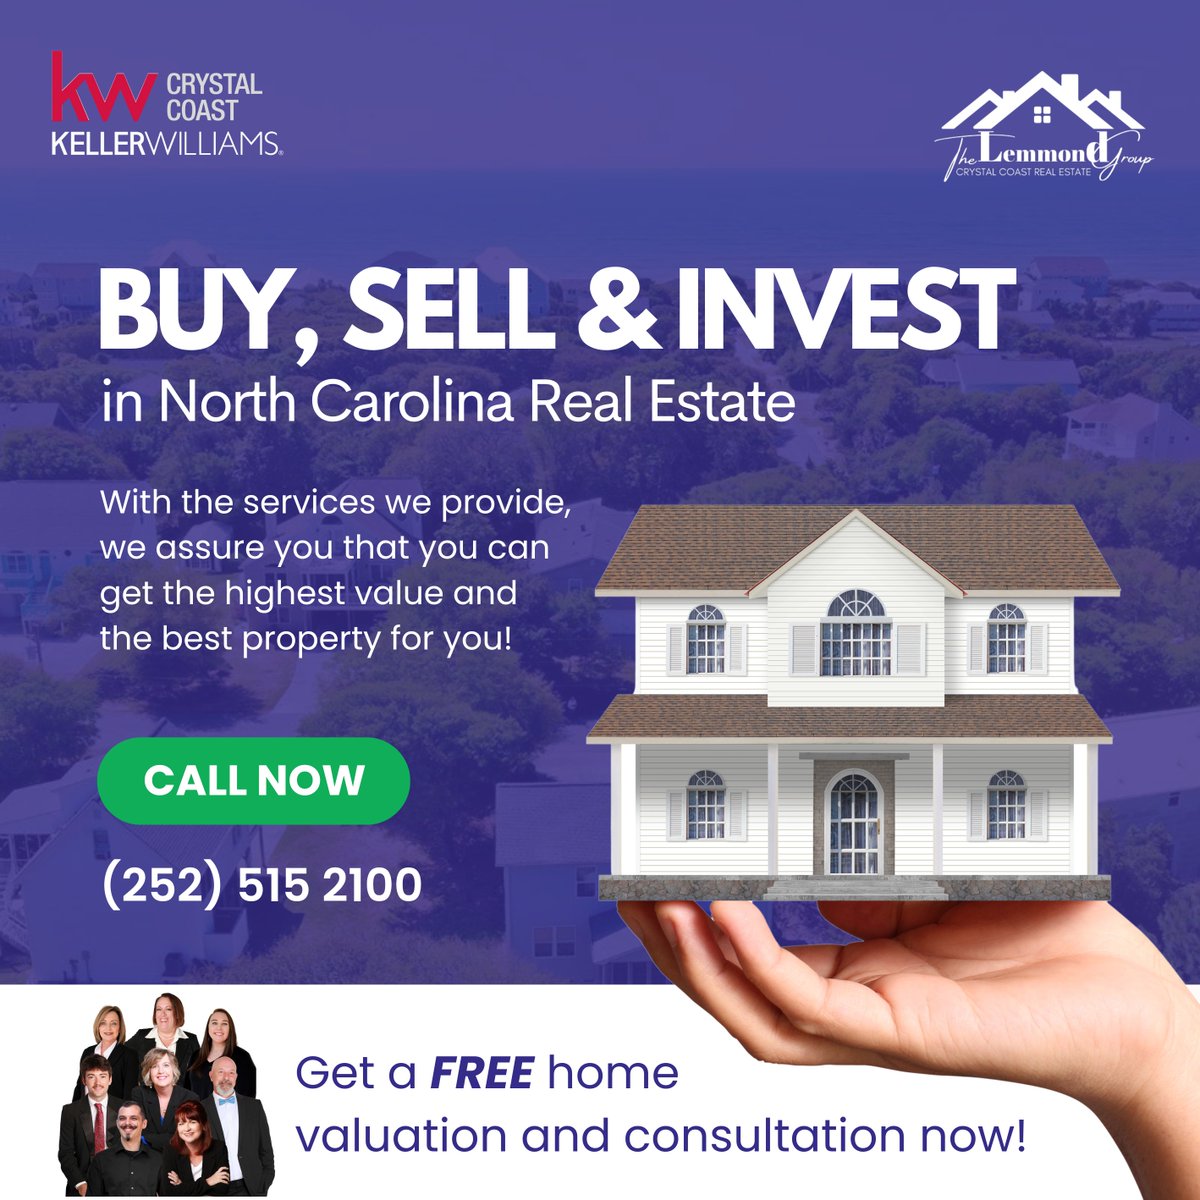 Going above and beyond to give you the best real estate services in 𝗡𝗼𝗿𝘁𝗵 𝗖𝗮𝗿𝗼𝗹𝗶𝗻𝗮! Hassle FREE, A smooth transaction for you! CALL US NOW! 💥 #ncrealestate #northcarolinarealtor #dreamhome #realestateinvestment #realestatebroker #beachliving #coastalliving #kwcc